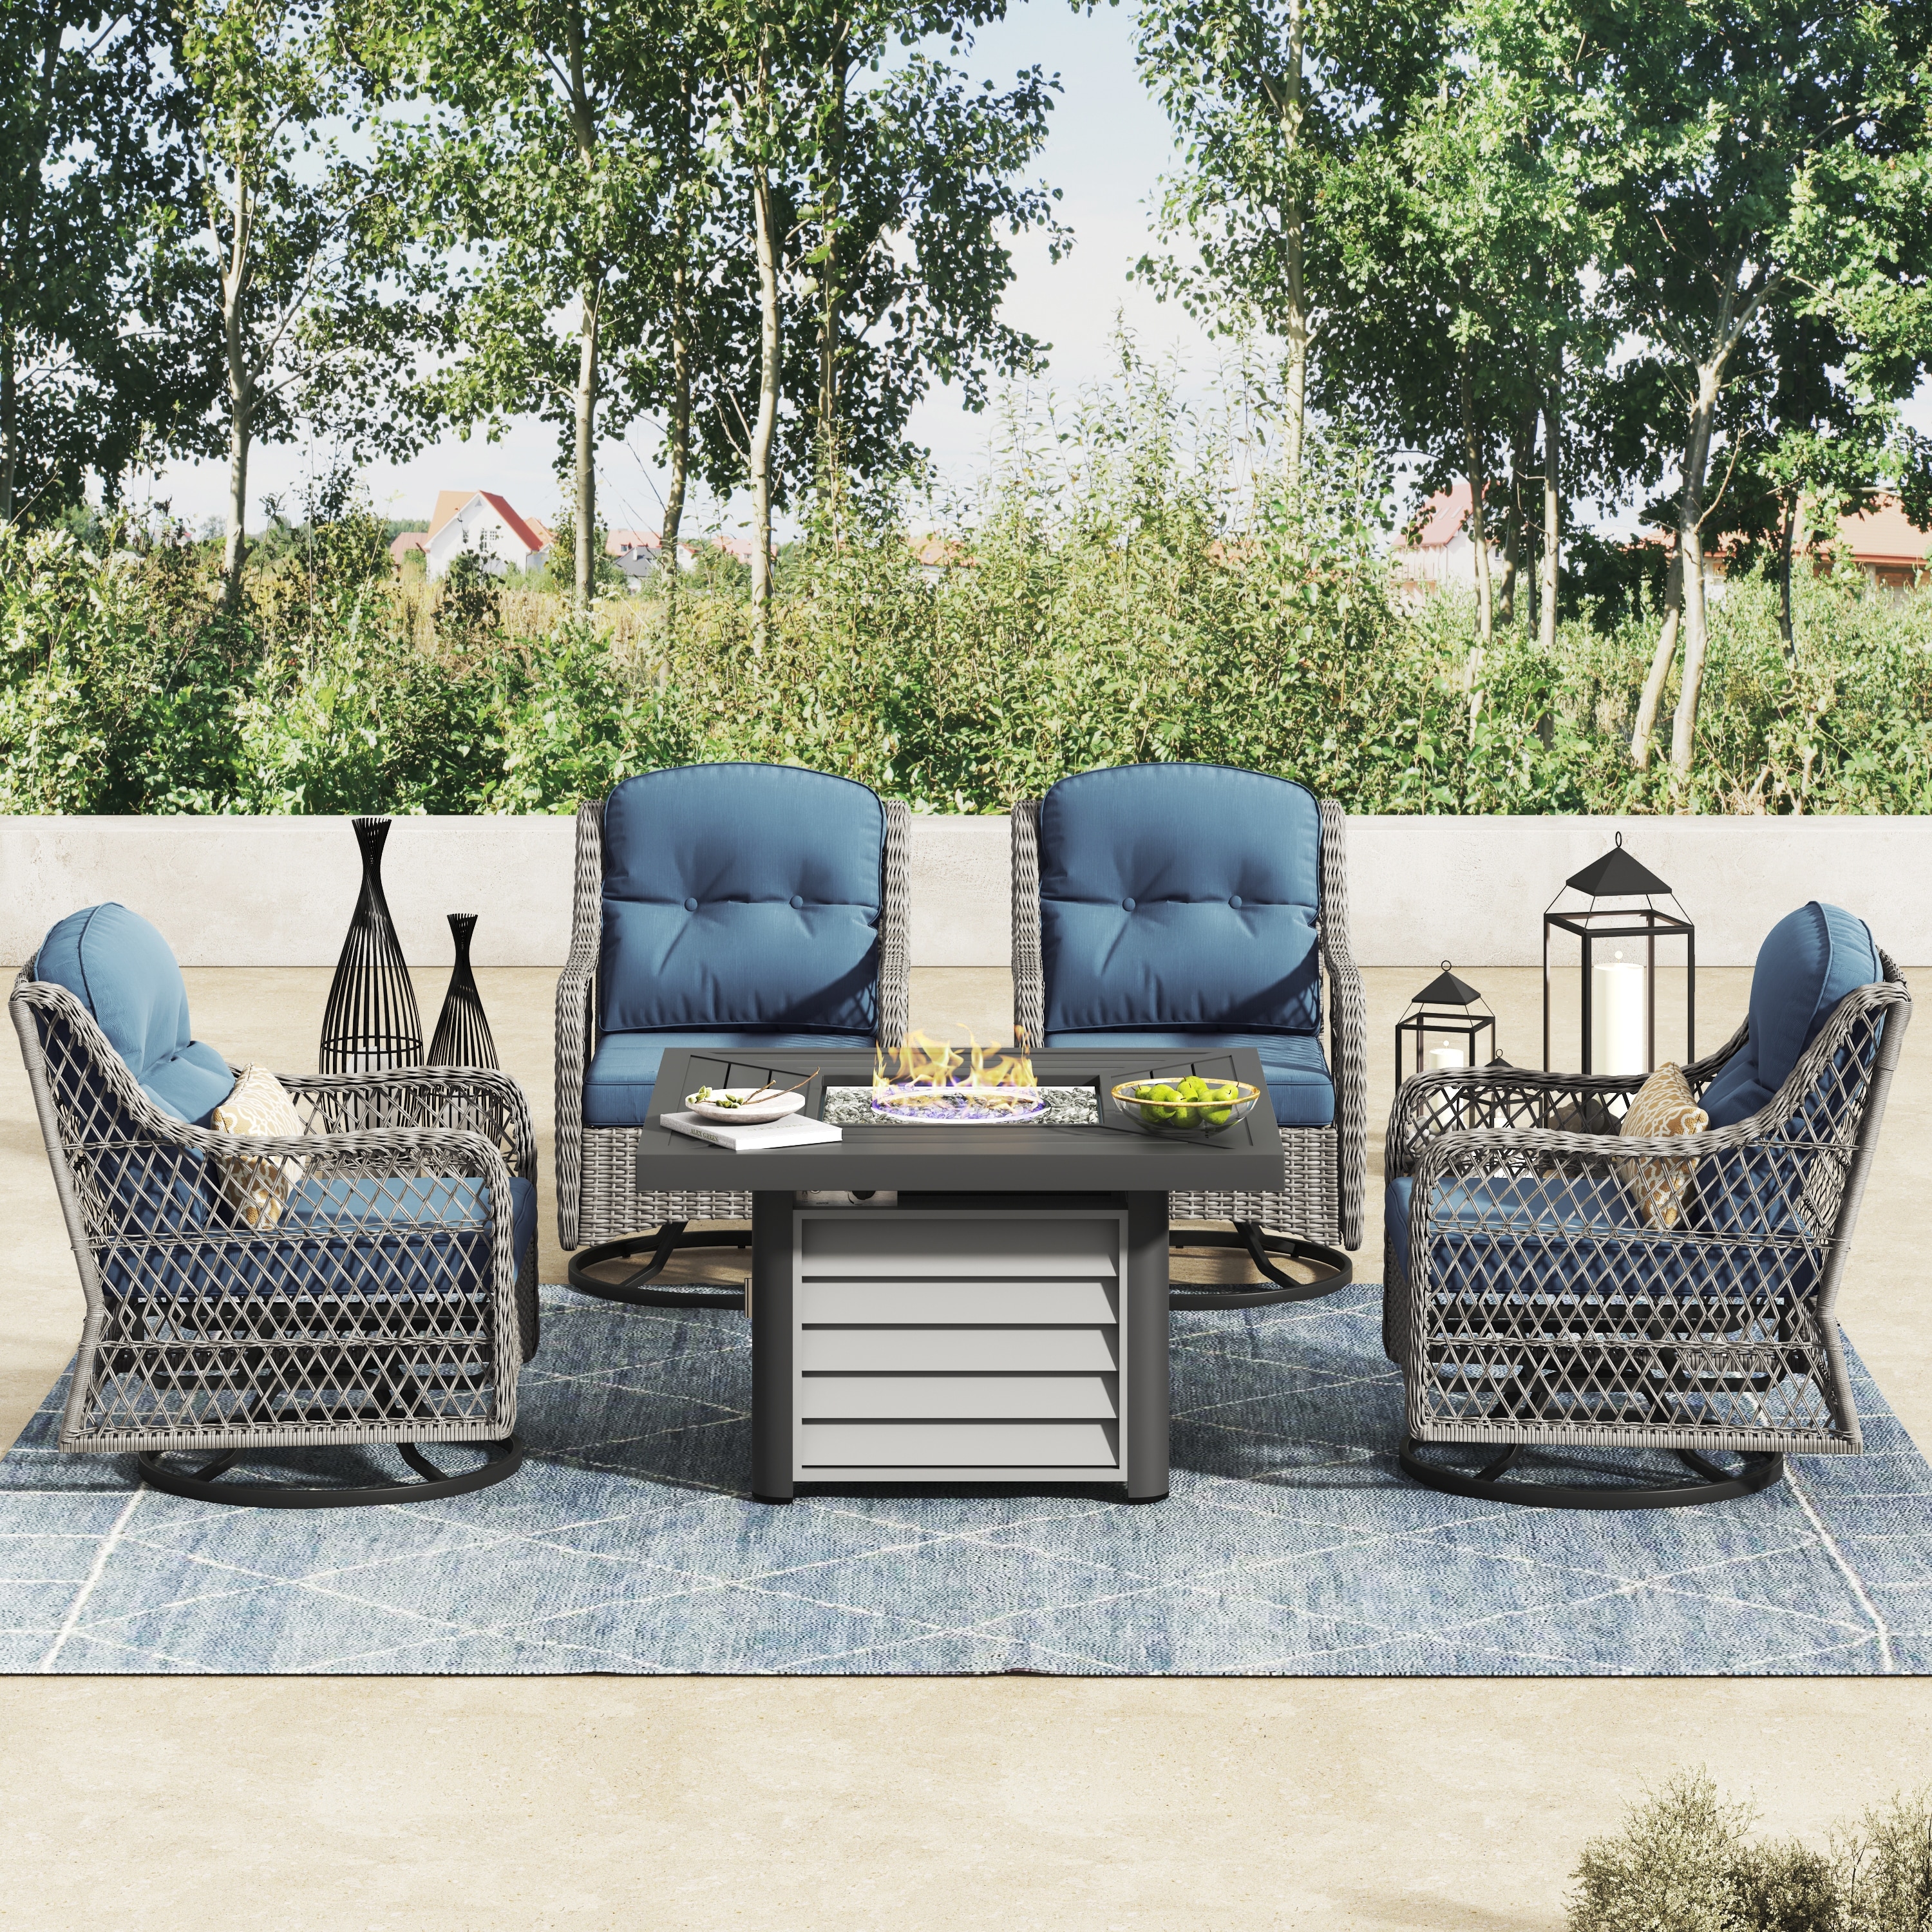 Corvus Vasconia 5pc Outdoor Resin Wicker Swivel Chat Set With Fire Table